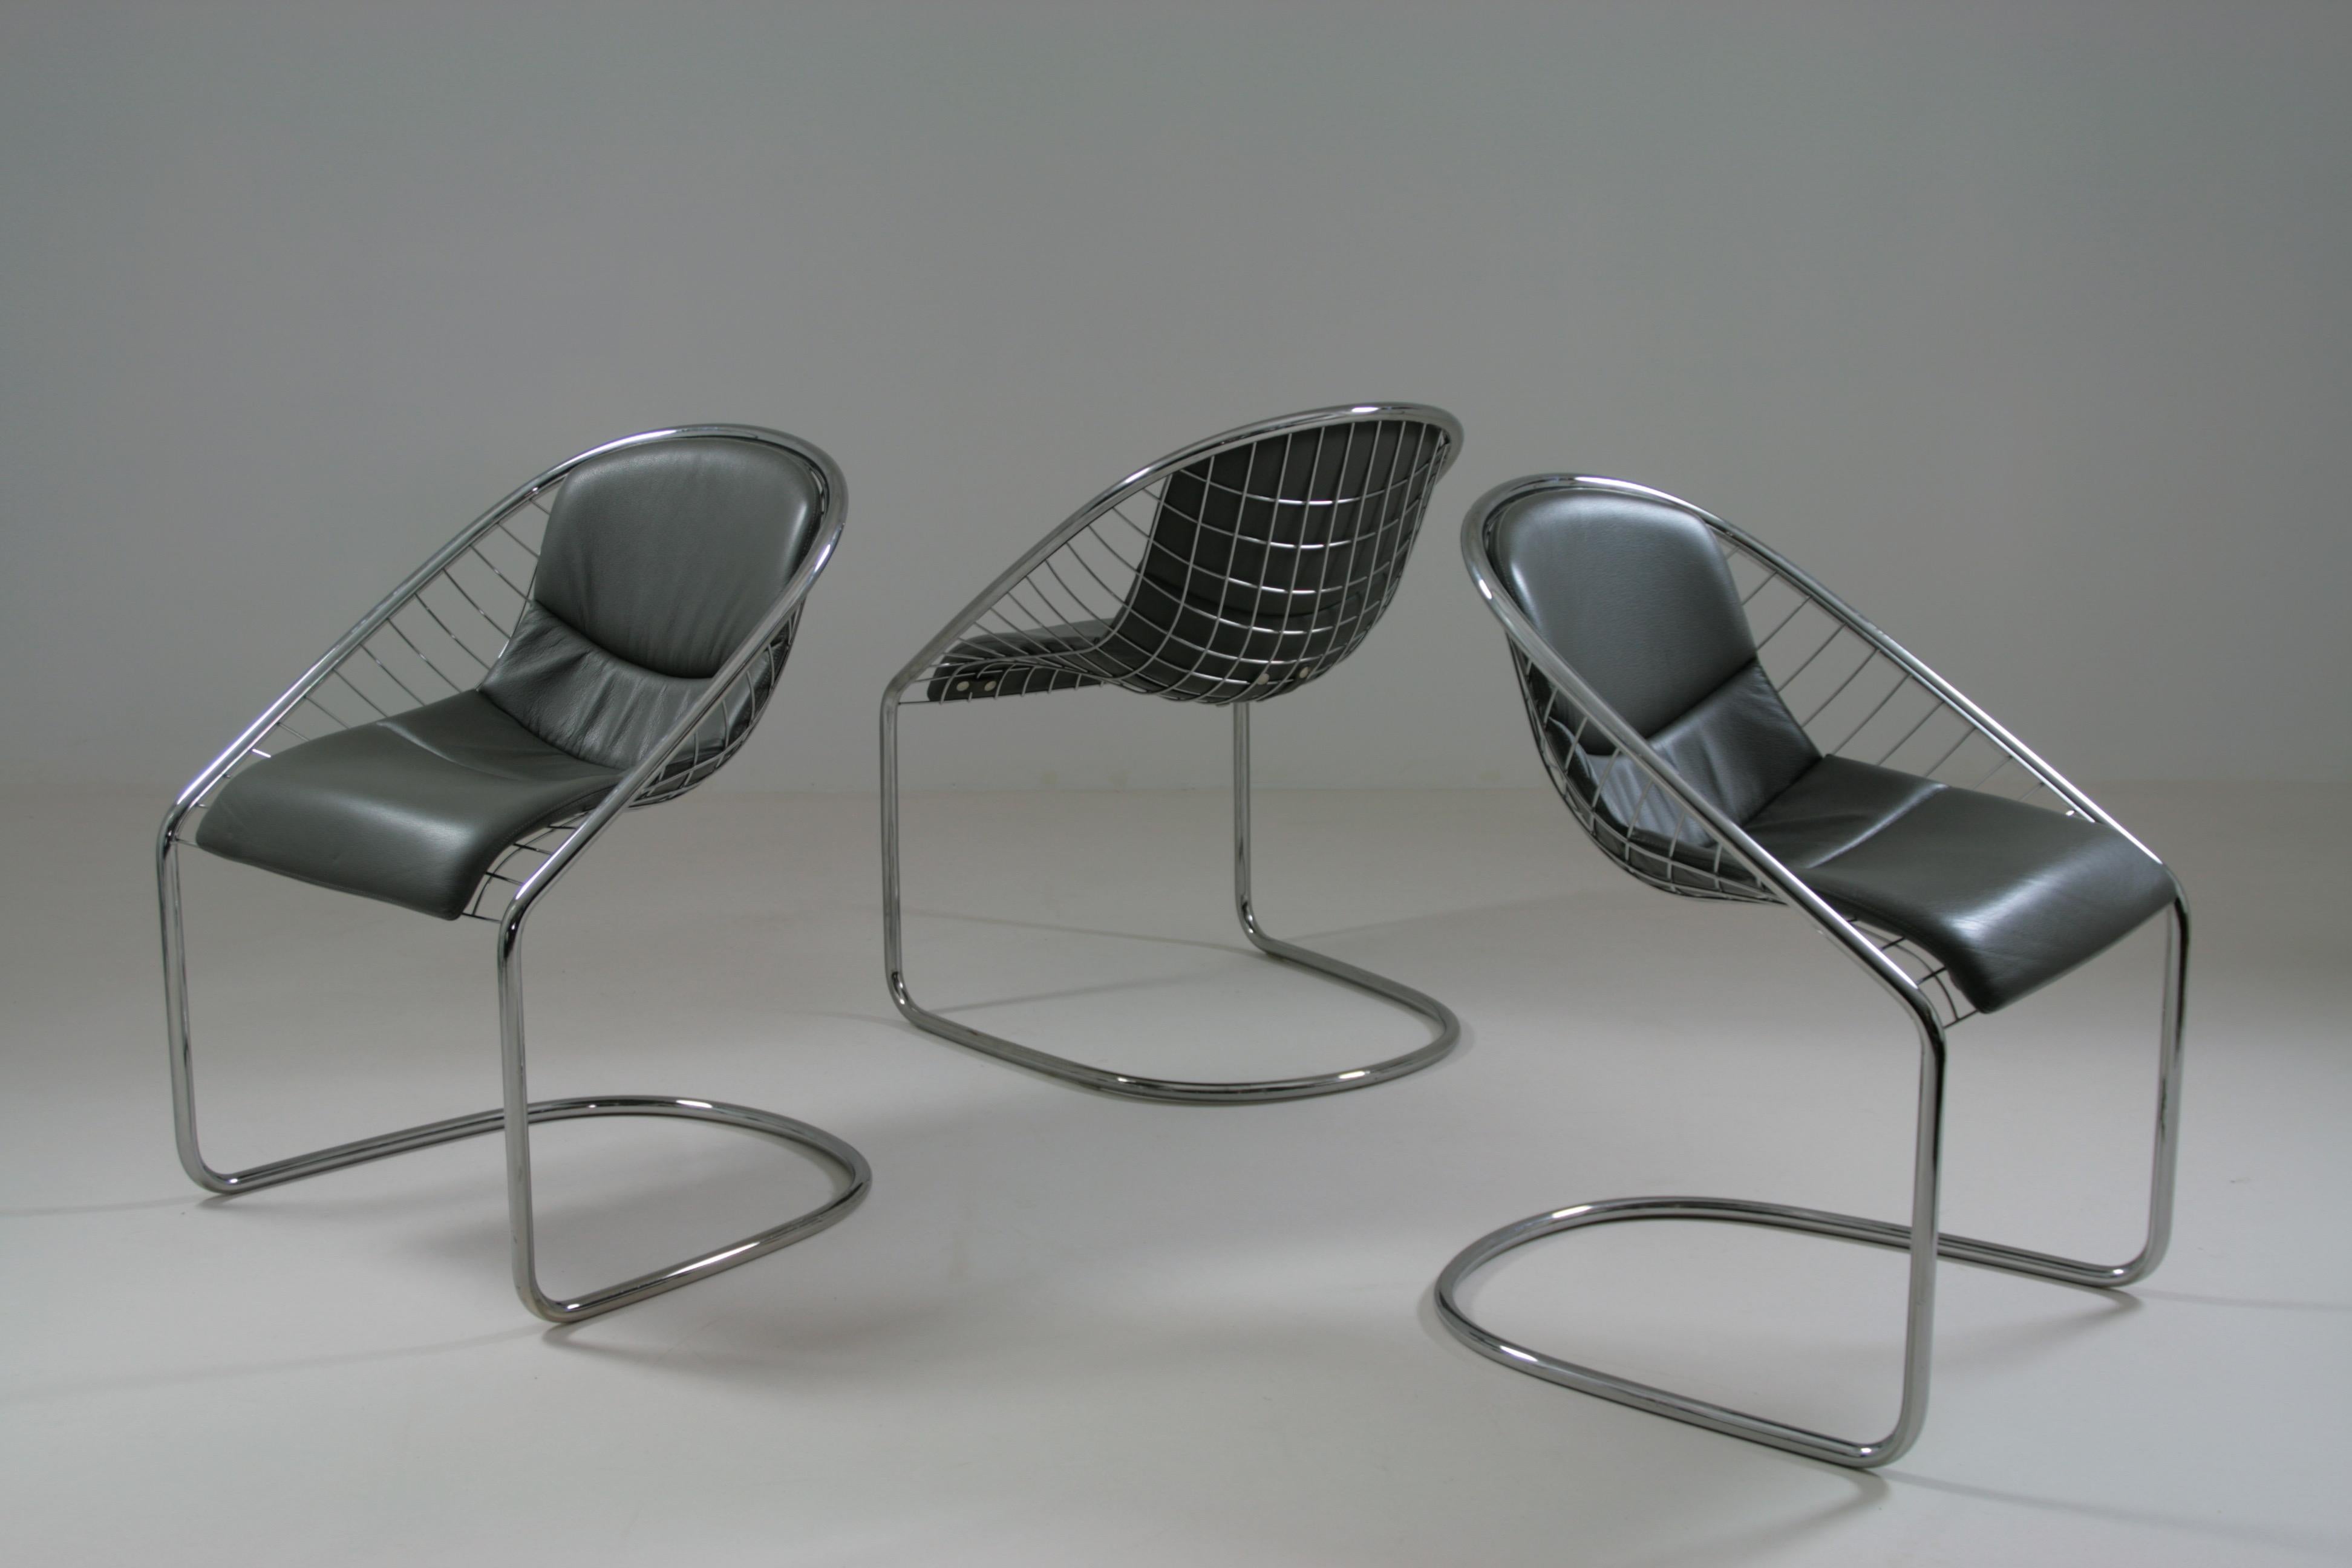 Steel Cortina Chairs by Gordon Guillaumier for Minotti, 2000s, Set of 3